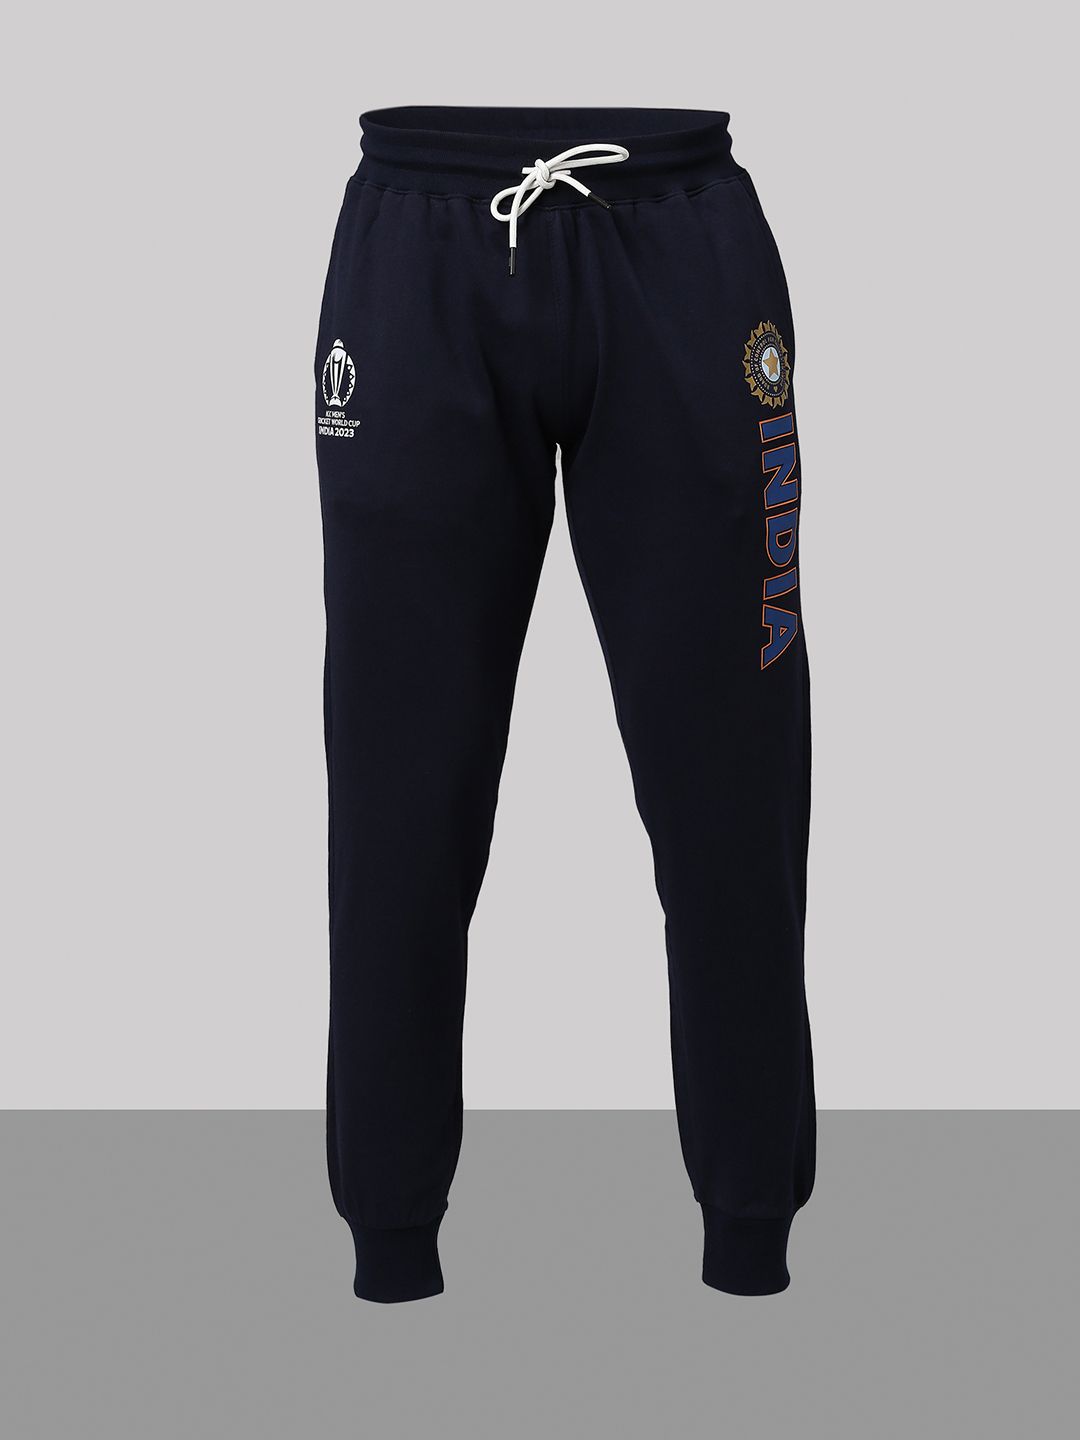 Buy Official ICC CWC-23 Men Navy Blue Solid Jogger from FanCode Shop.